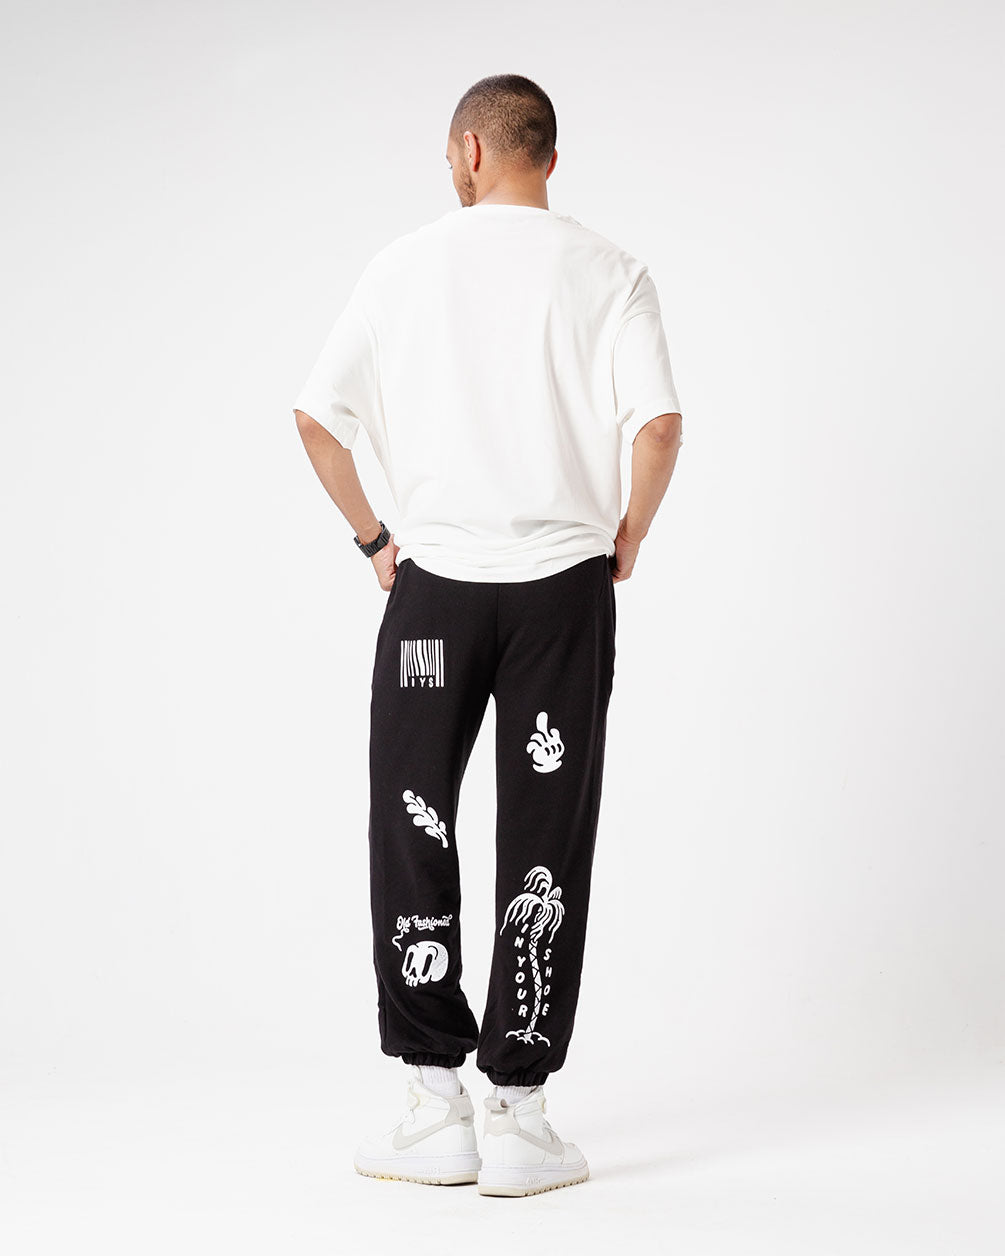 Black Printed Swants (Sweatpants) Swants IN YOUR SHOE XL 